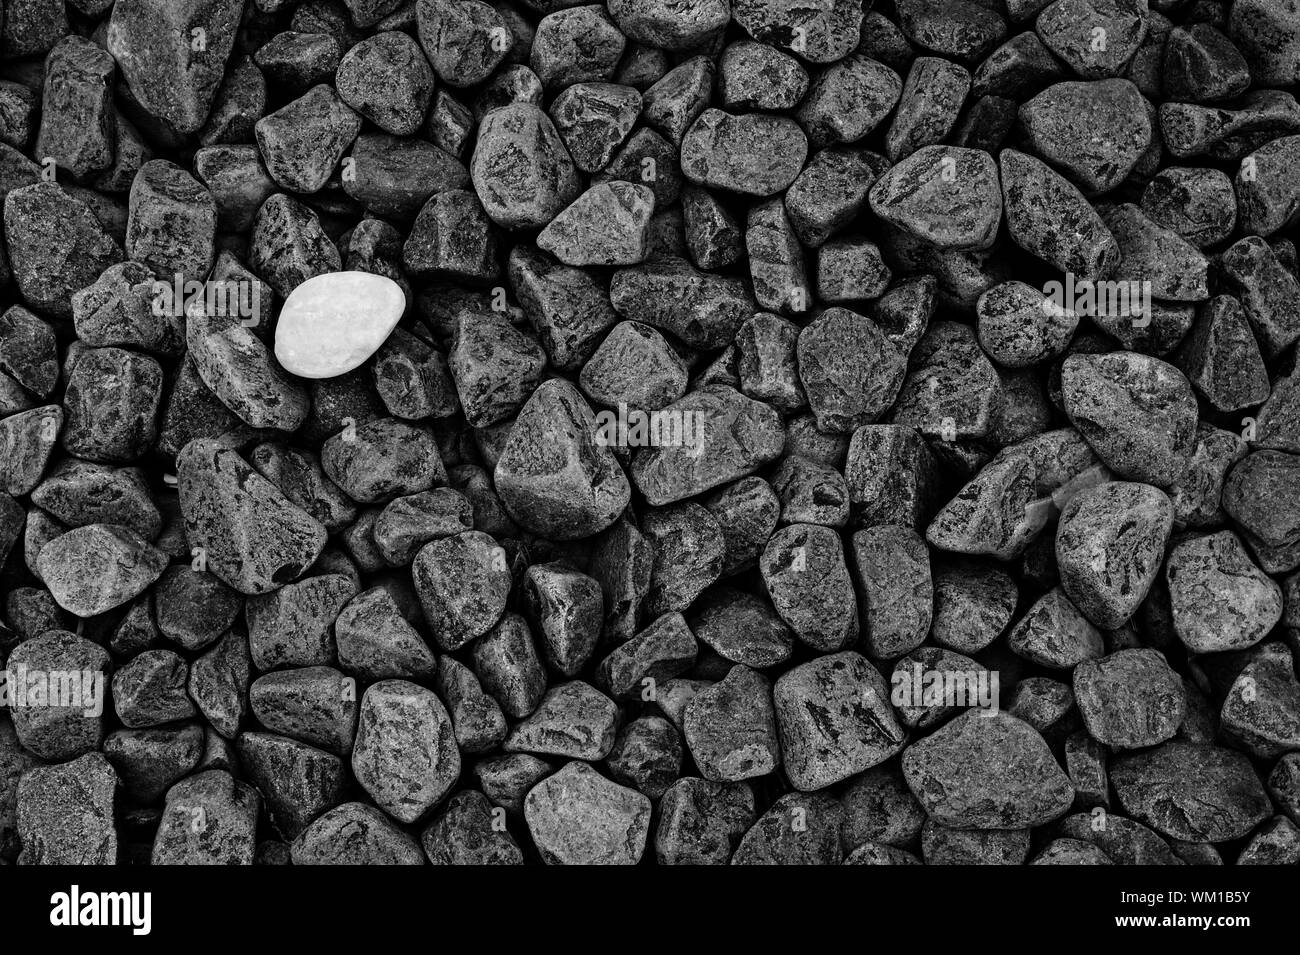 Diversity concept: lone white stone among gray black stones. Stone texture and background. Stock Photo